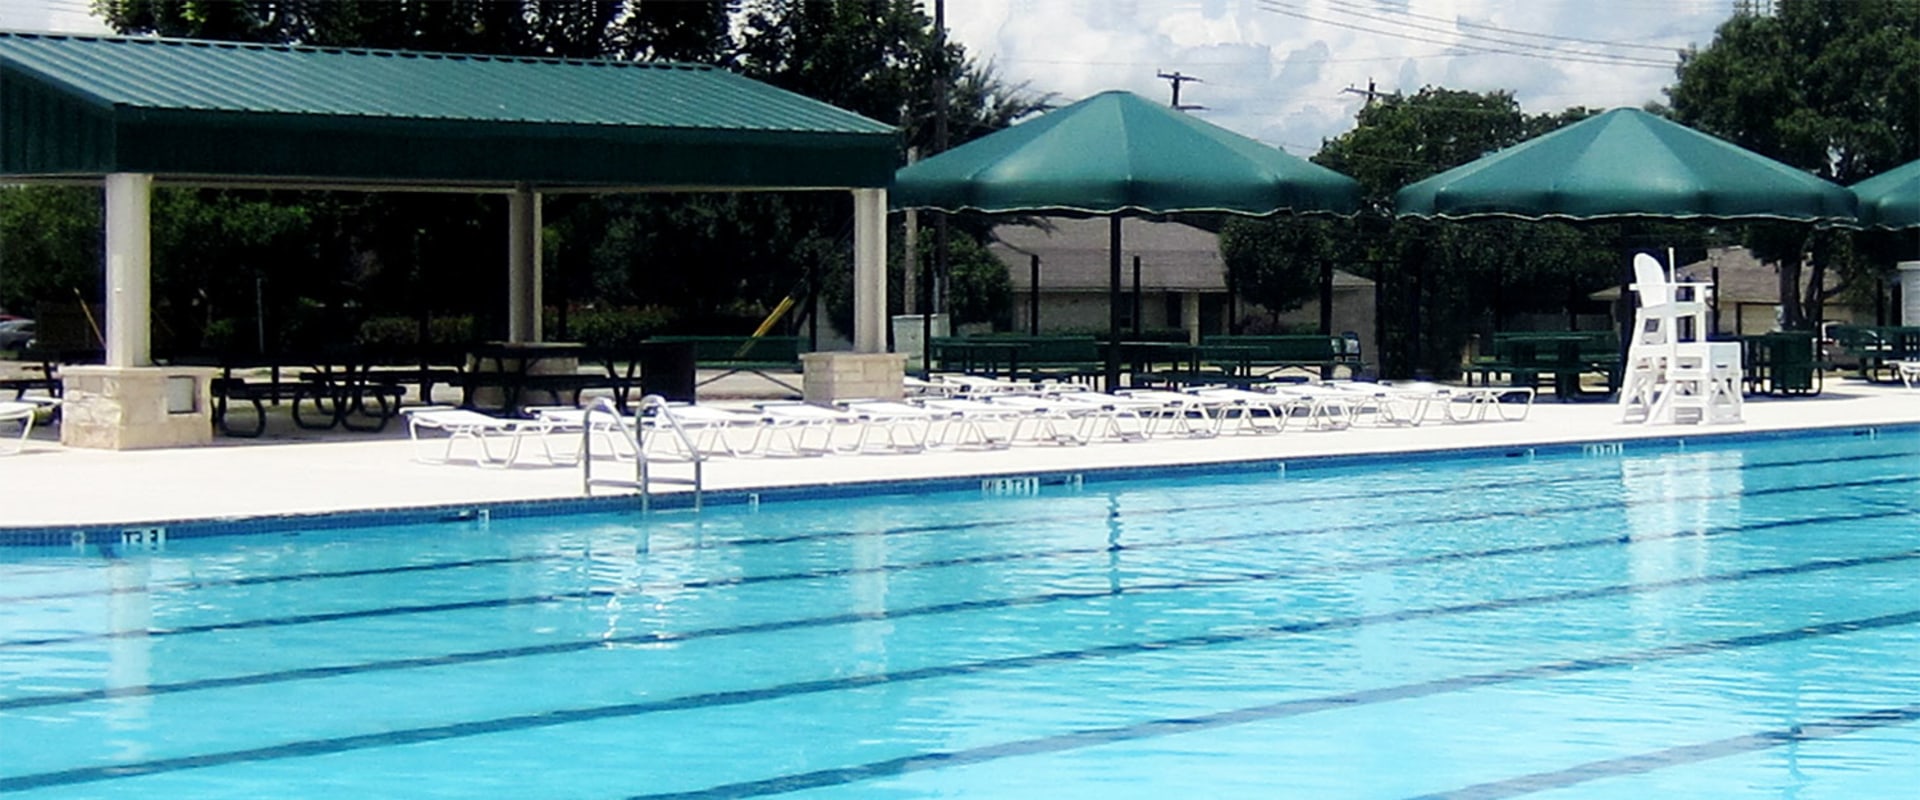 The Ins and Outs of Installing a Swimming Pool in Georgetown, TX